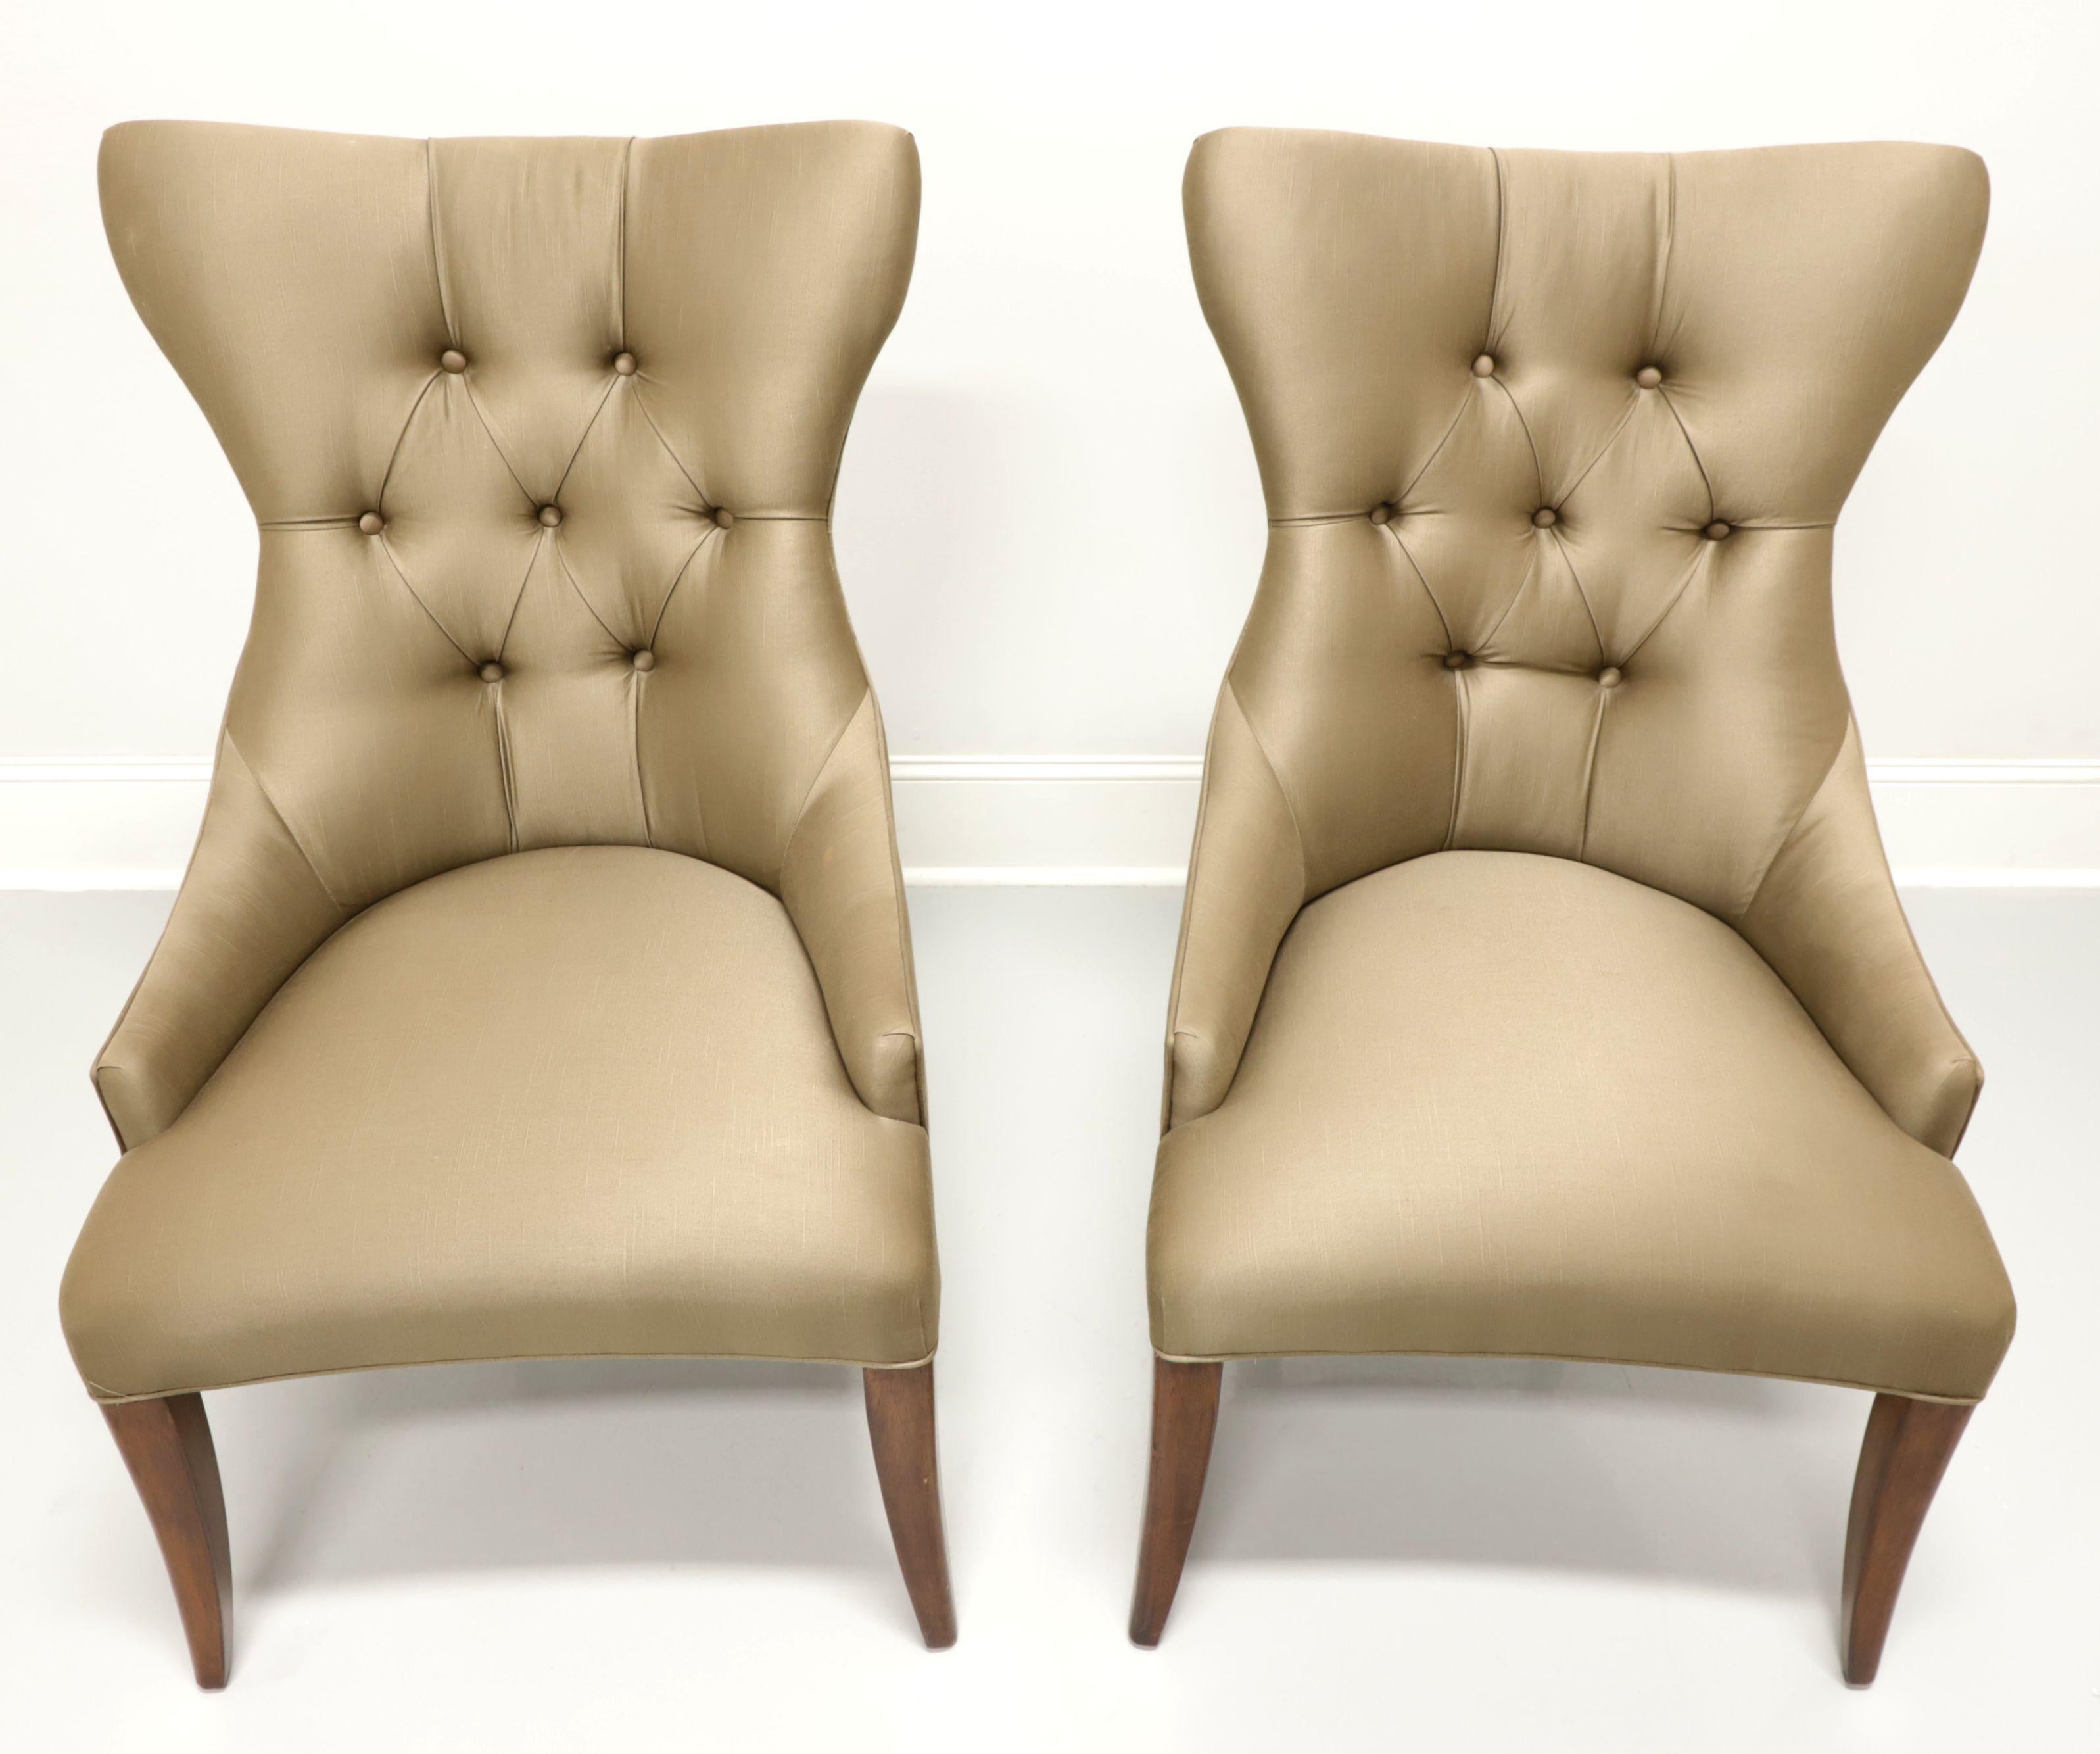 A pair of Contemporary style dining side chairs by Bernhardt Furniture, from their Opus XIX Collection. Solid wood frame with a walnut finish and fabric upholstered. Features a high back with slight wings, button tufted, low arms, high sheen satin